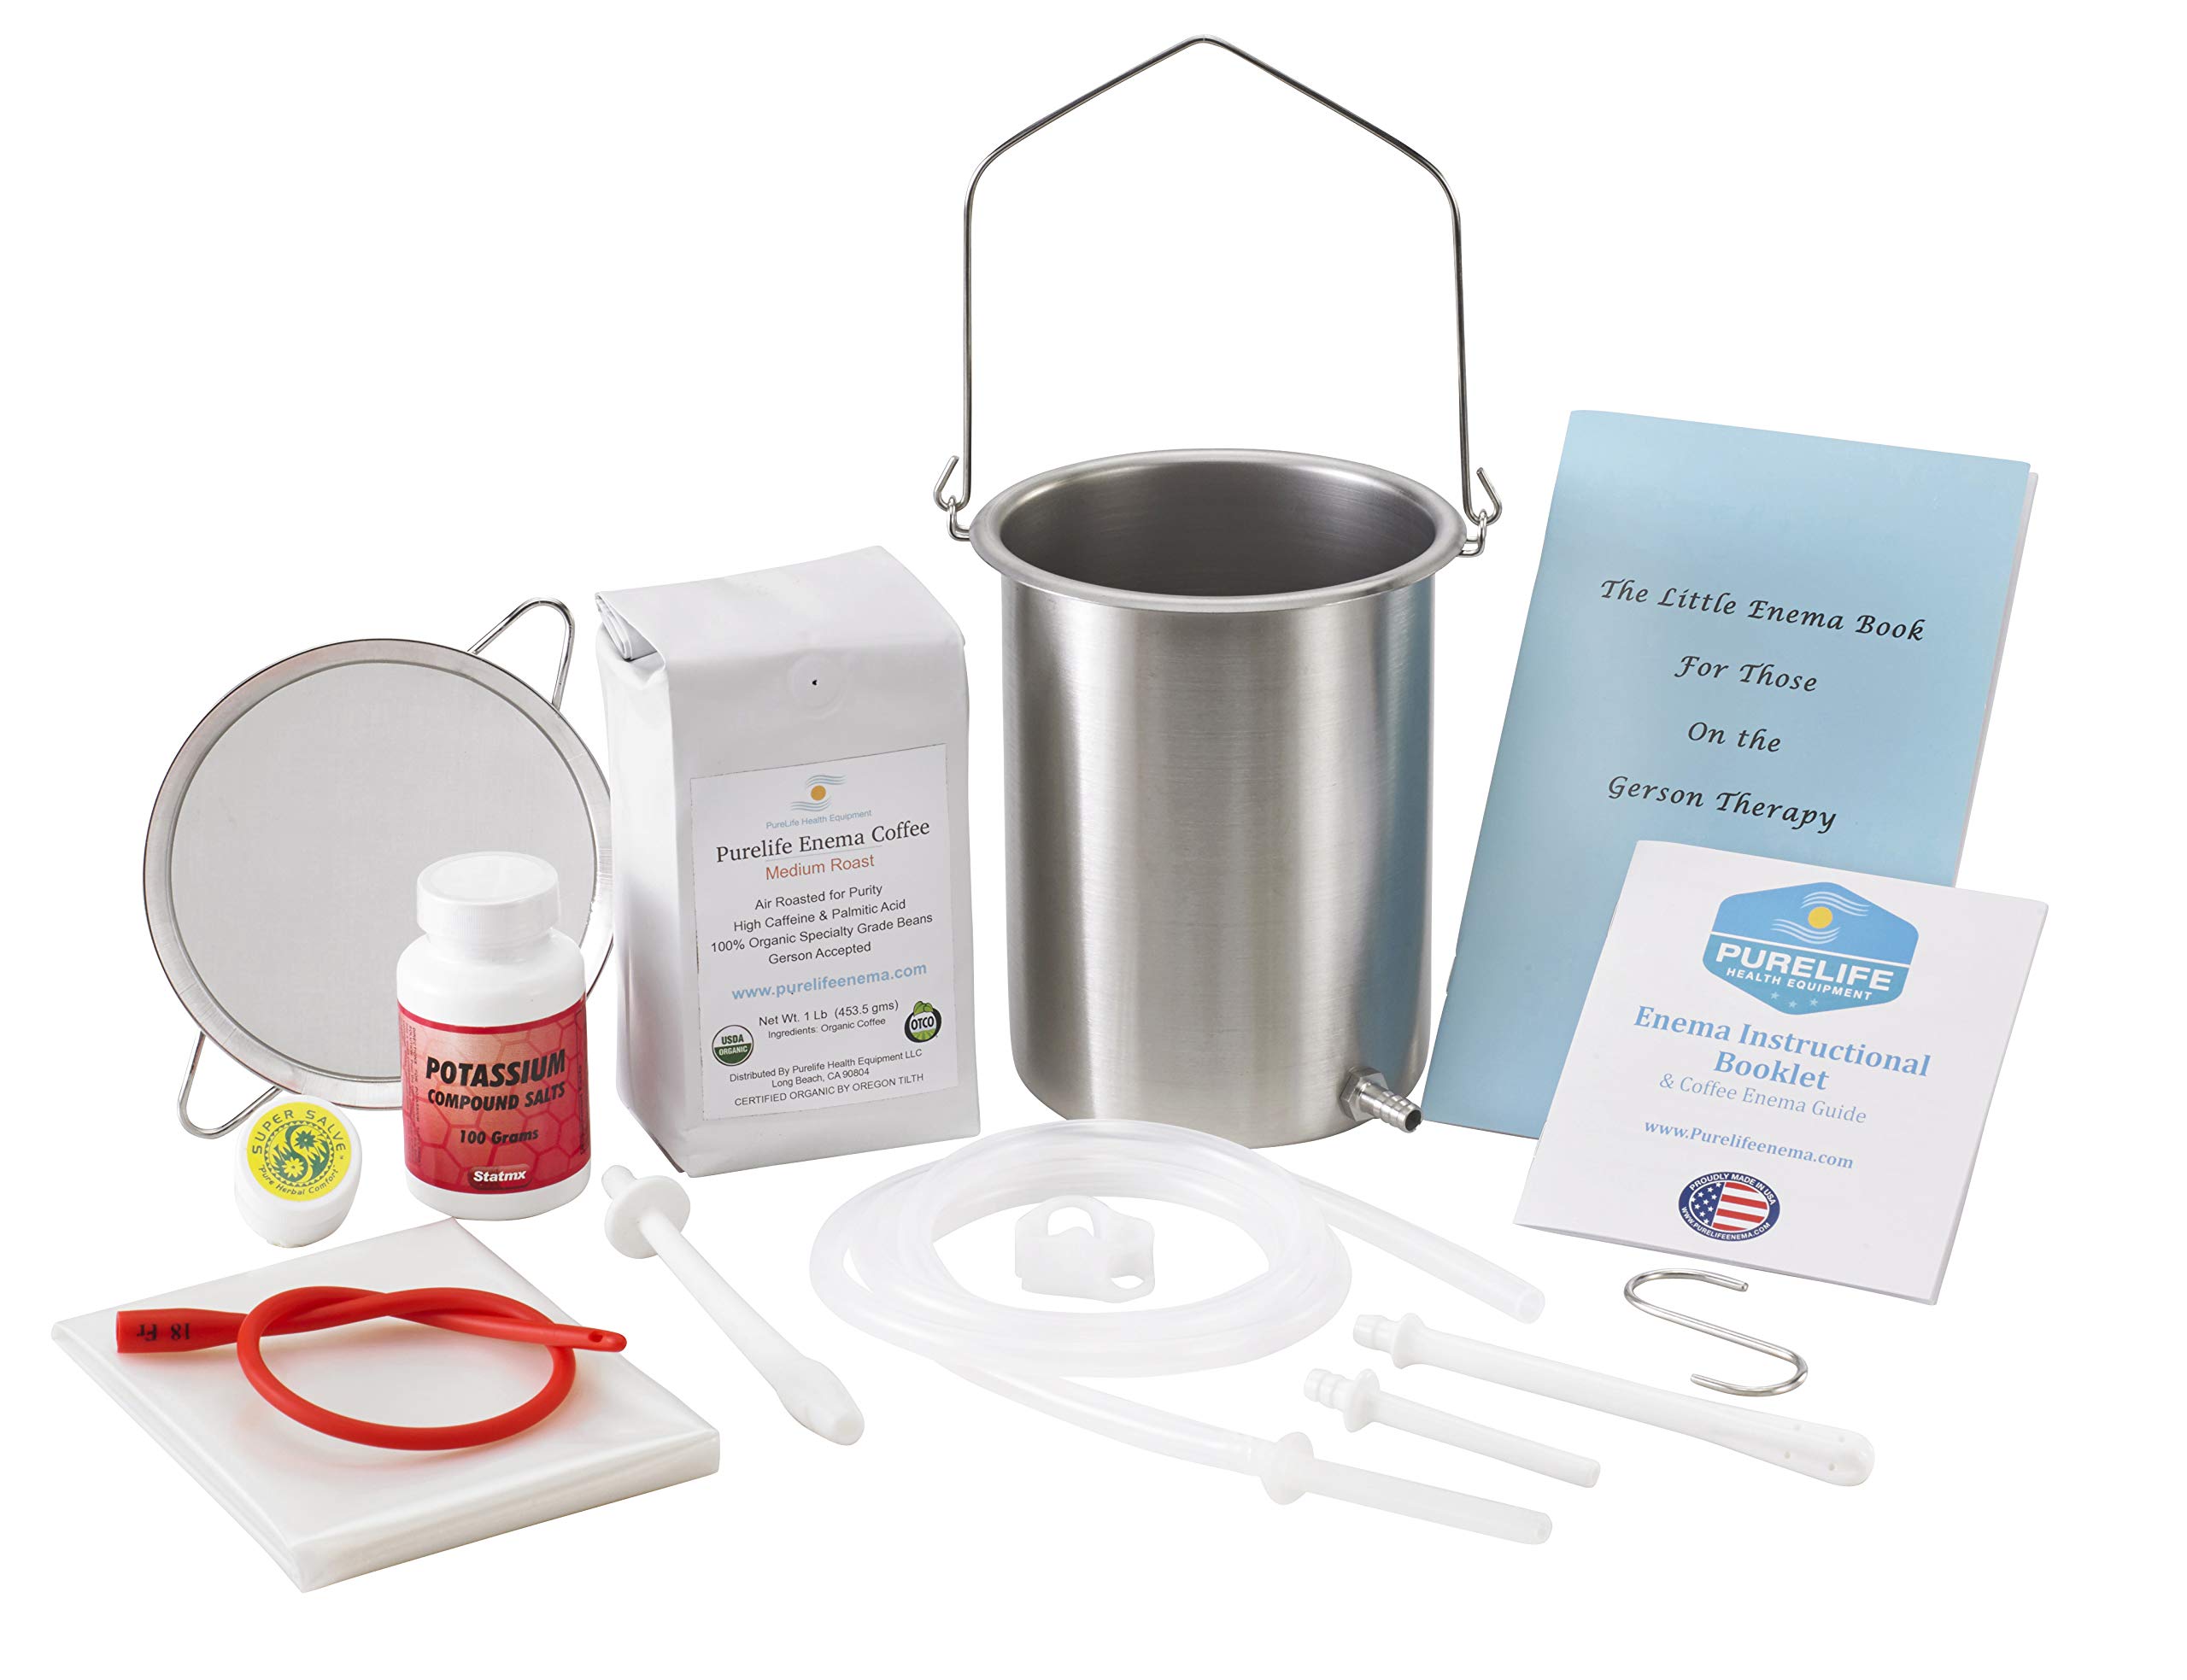 Enema Kits by Purelife -Dream Coffee Enema Kit for Gerson Therapy - Made in USA